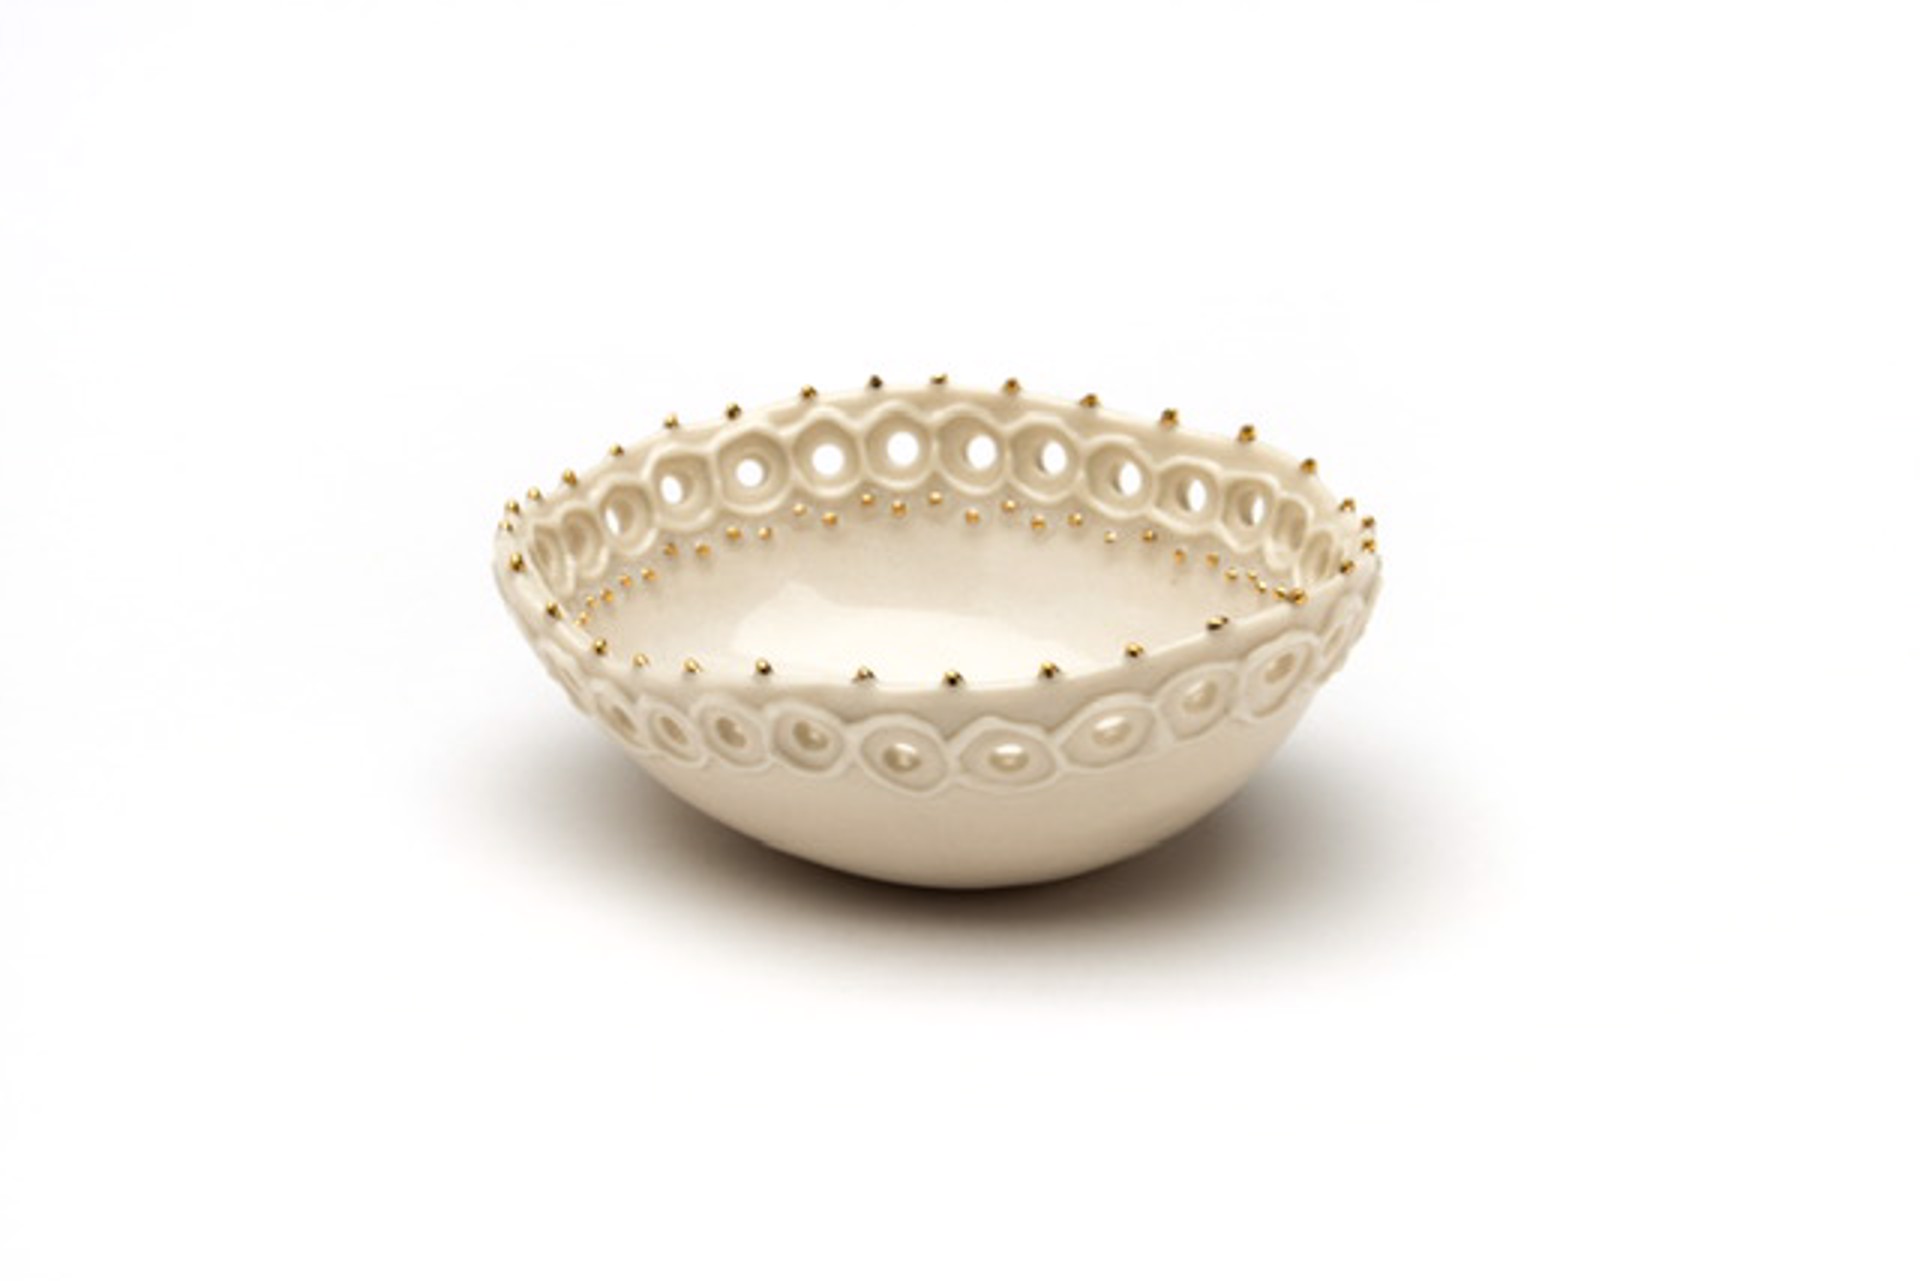 X-Small White & Gold Lacy Bowl by Maria Bruckman